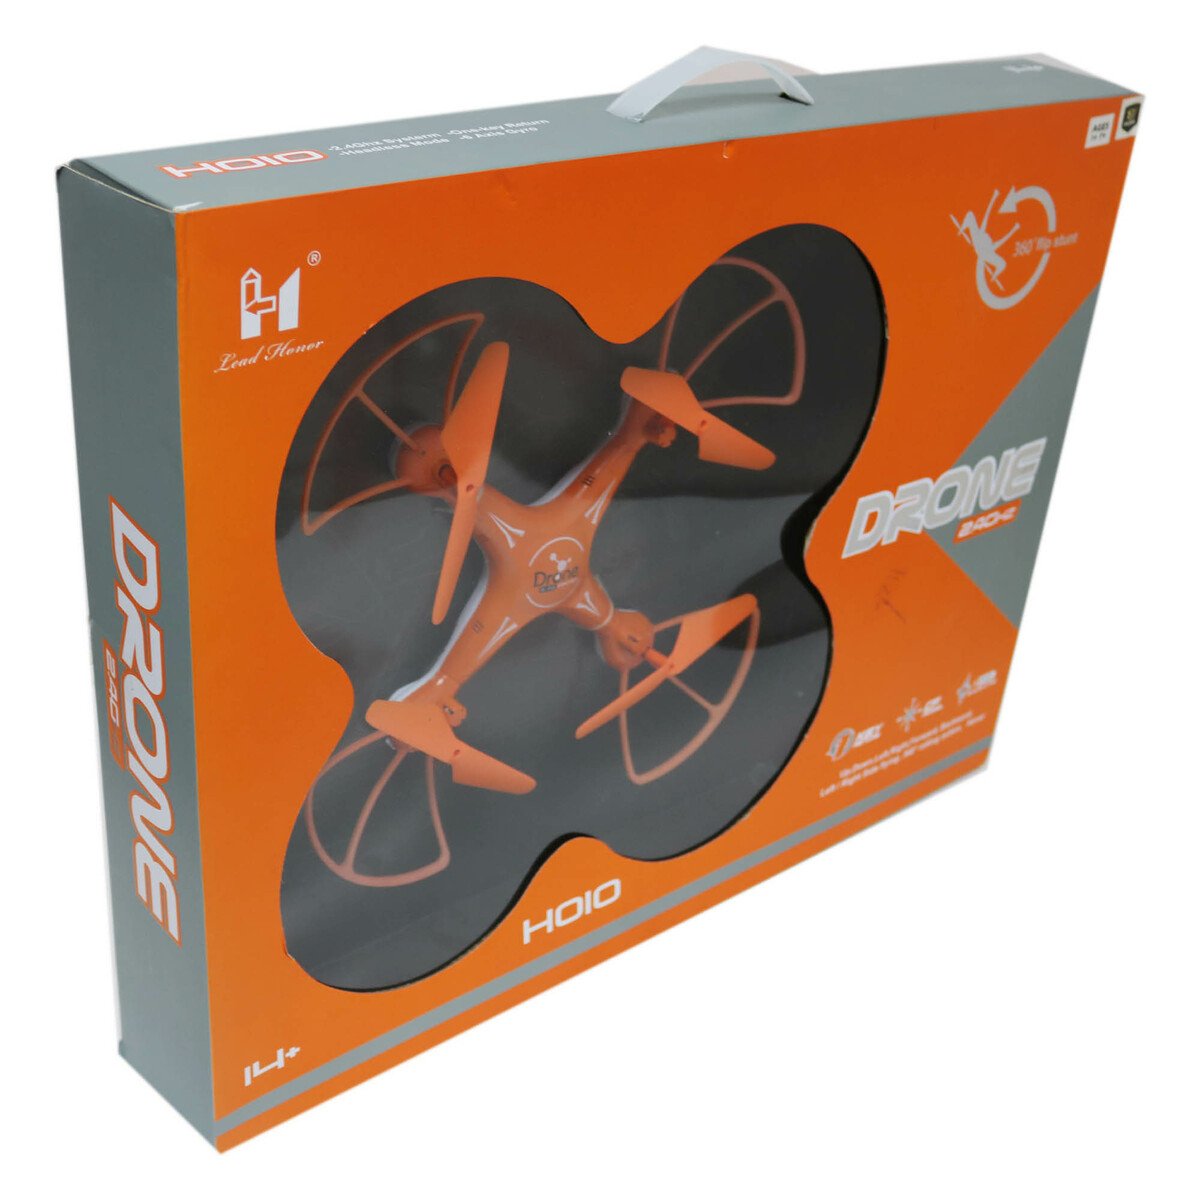 Skid Fusion Helicopter Remote Control H010